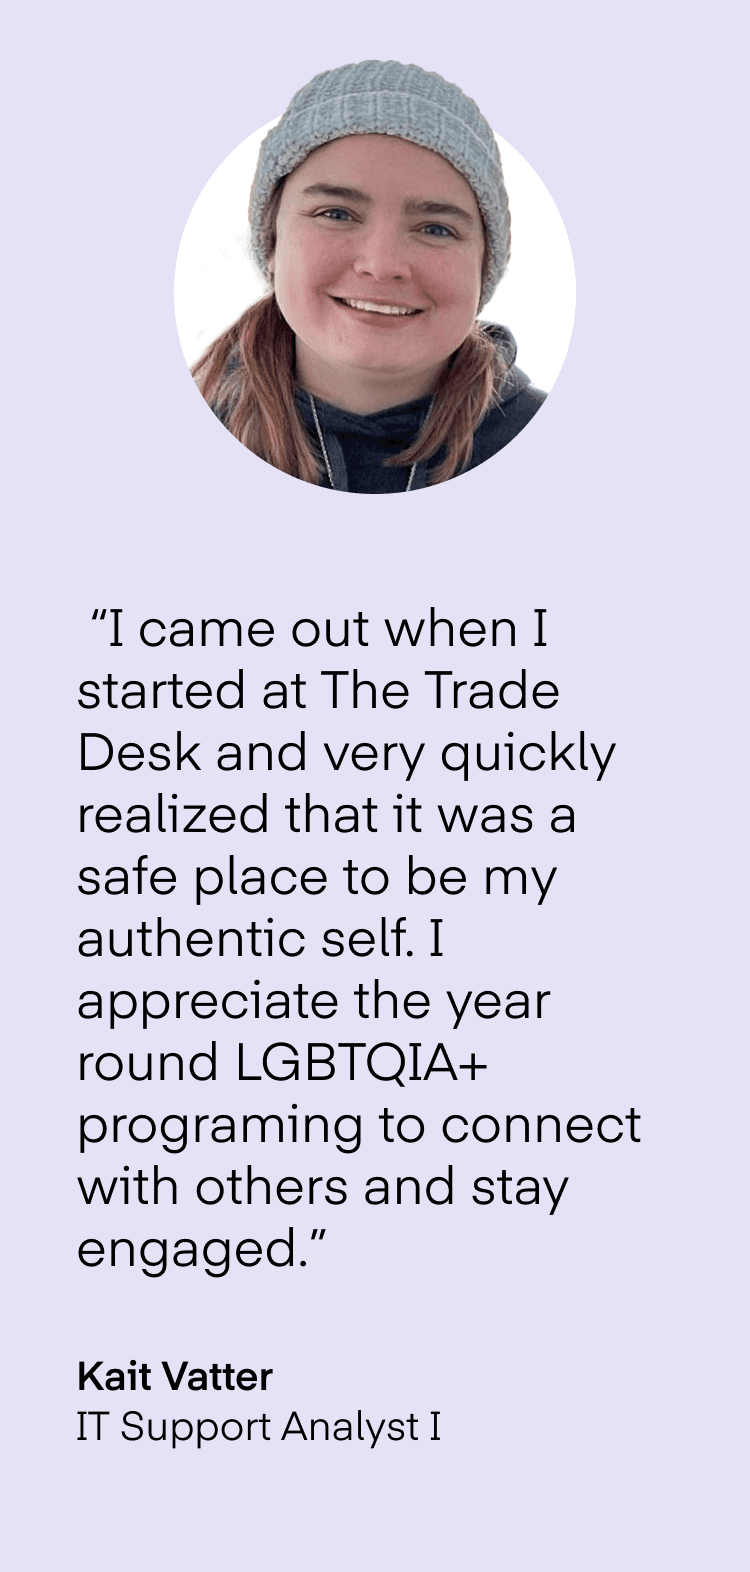 Quote and headshot from Kait Vatter, IT Support Analyst I at The Trade Desk on a purple background